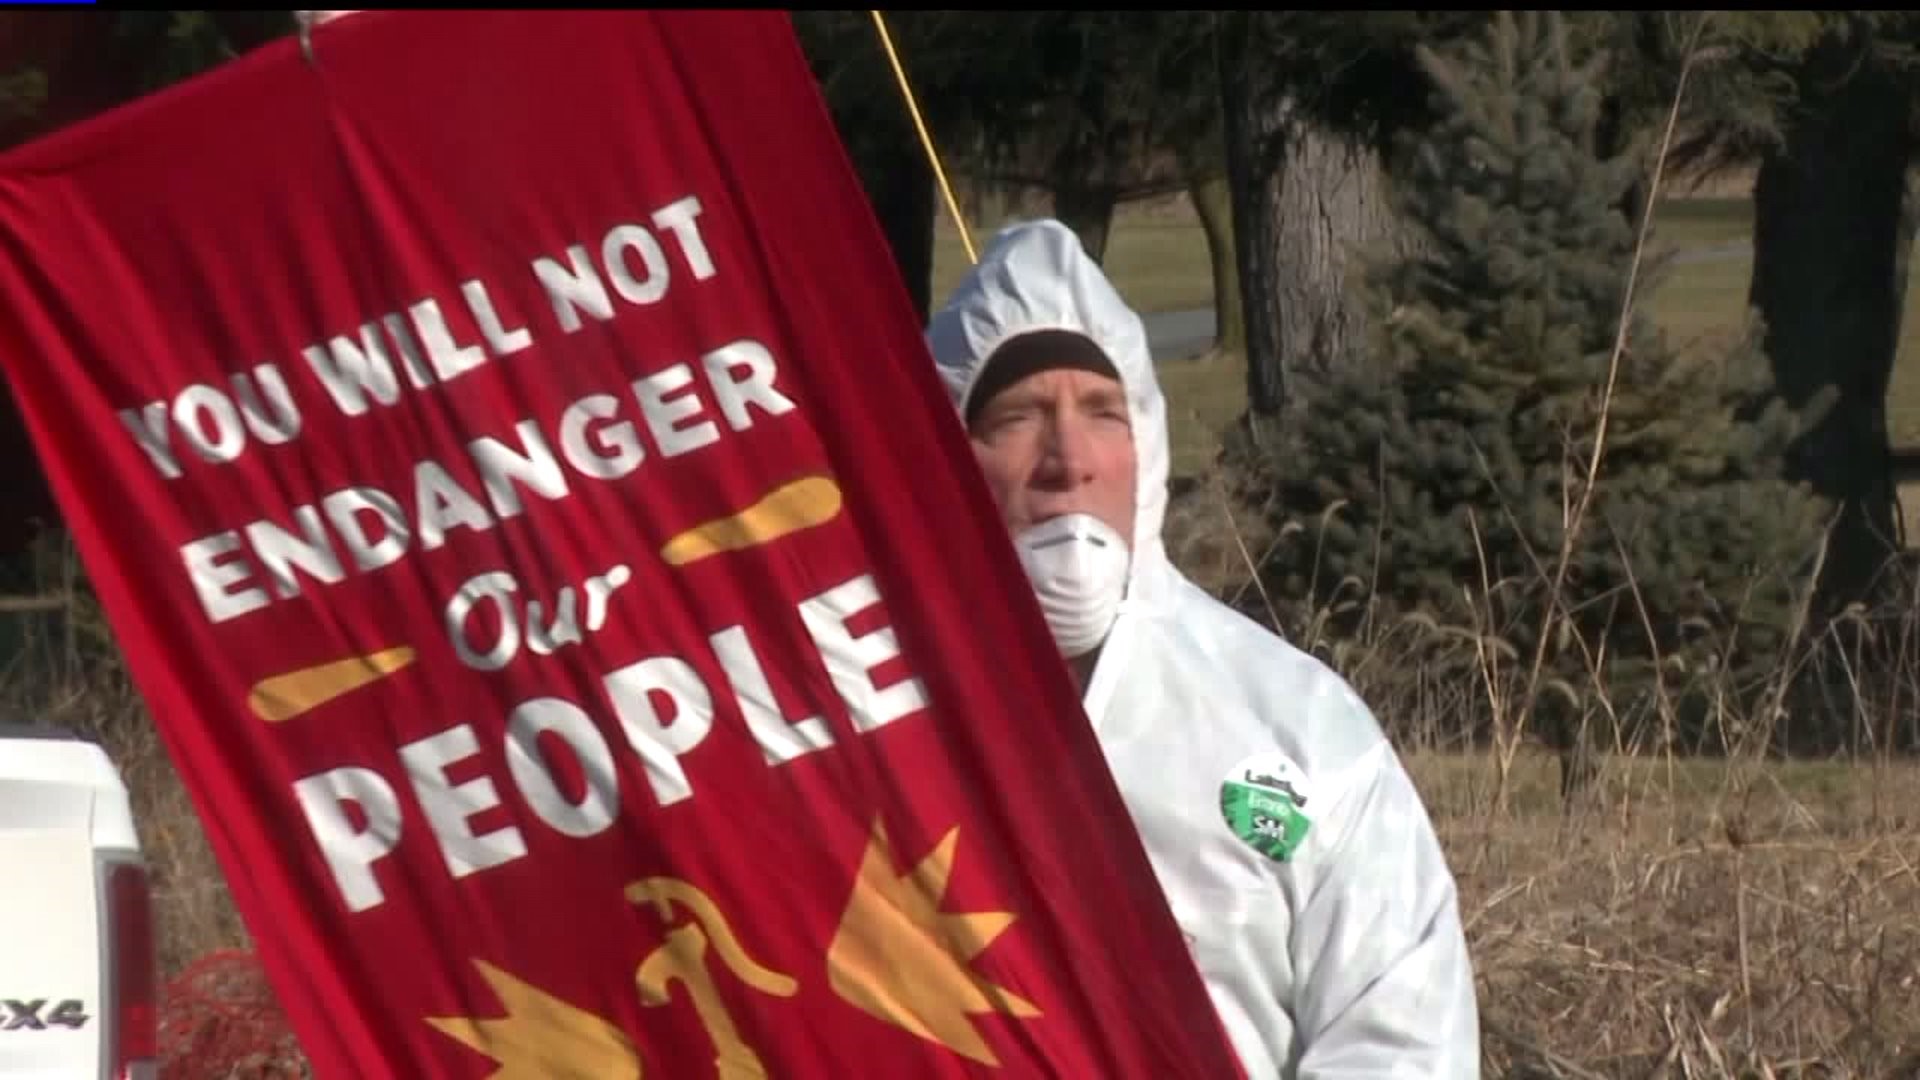 Pipeline protesters in Lancaster County take action in light of recent oil spills